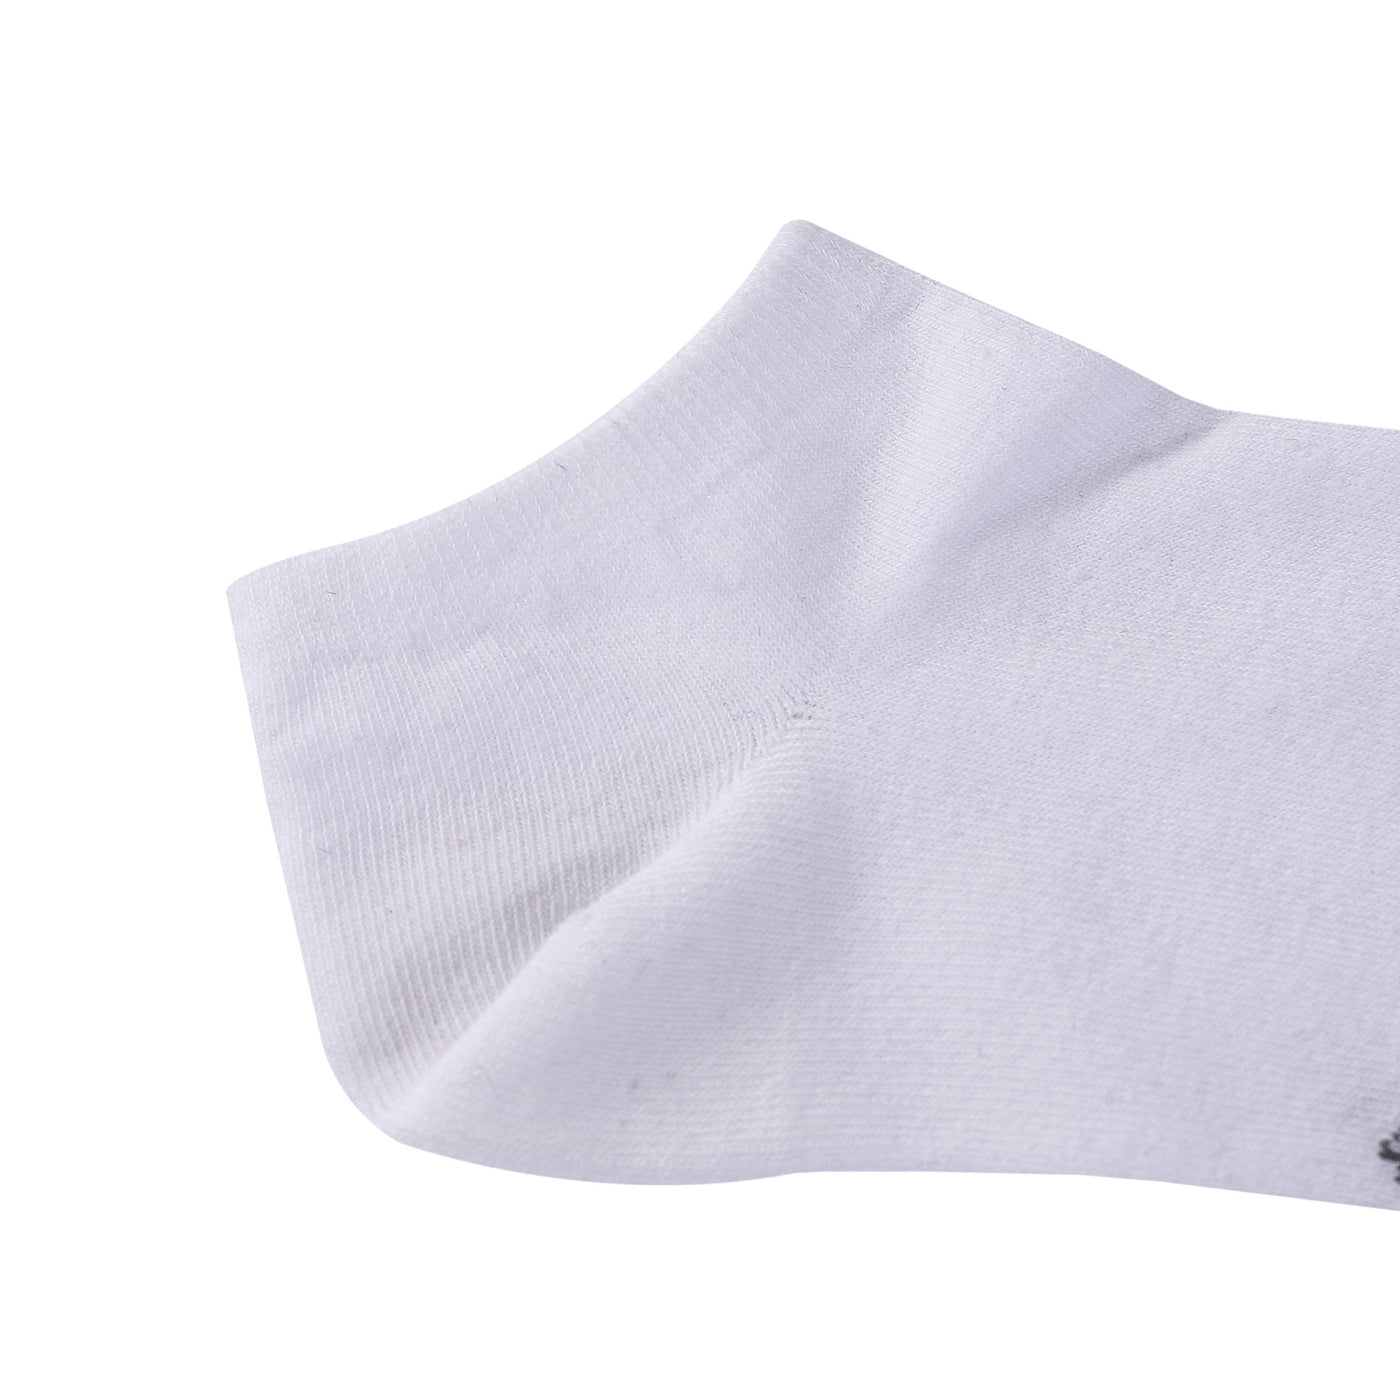 Laulax Ladies 6 Pairs Finest Combed Cotton Arch Support Trainer Socks, White, Size UK 3 - 5